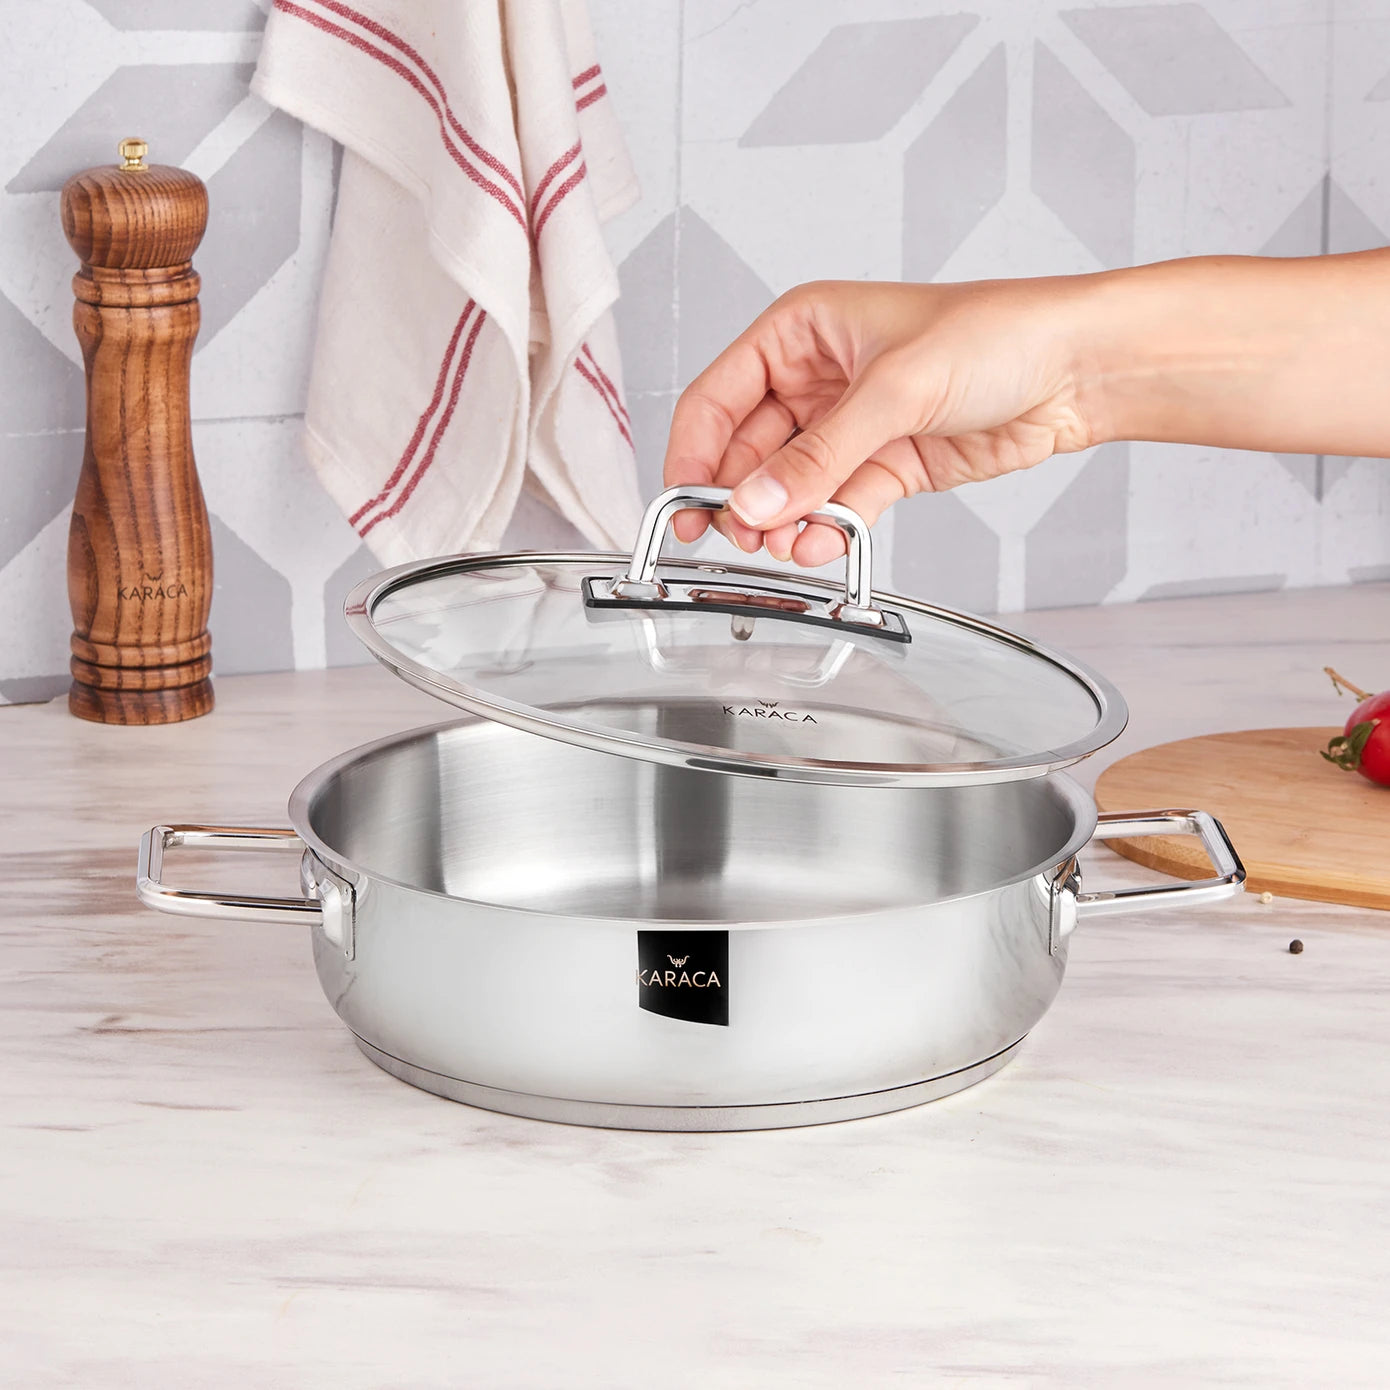 Stainless Steel Pot - Durable and versatile cookware for your kitchen